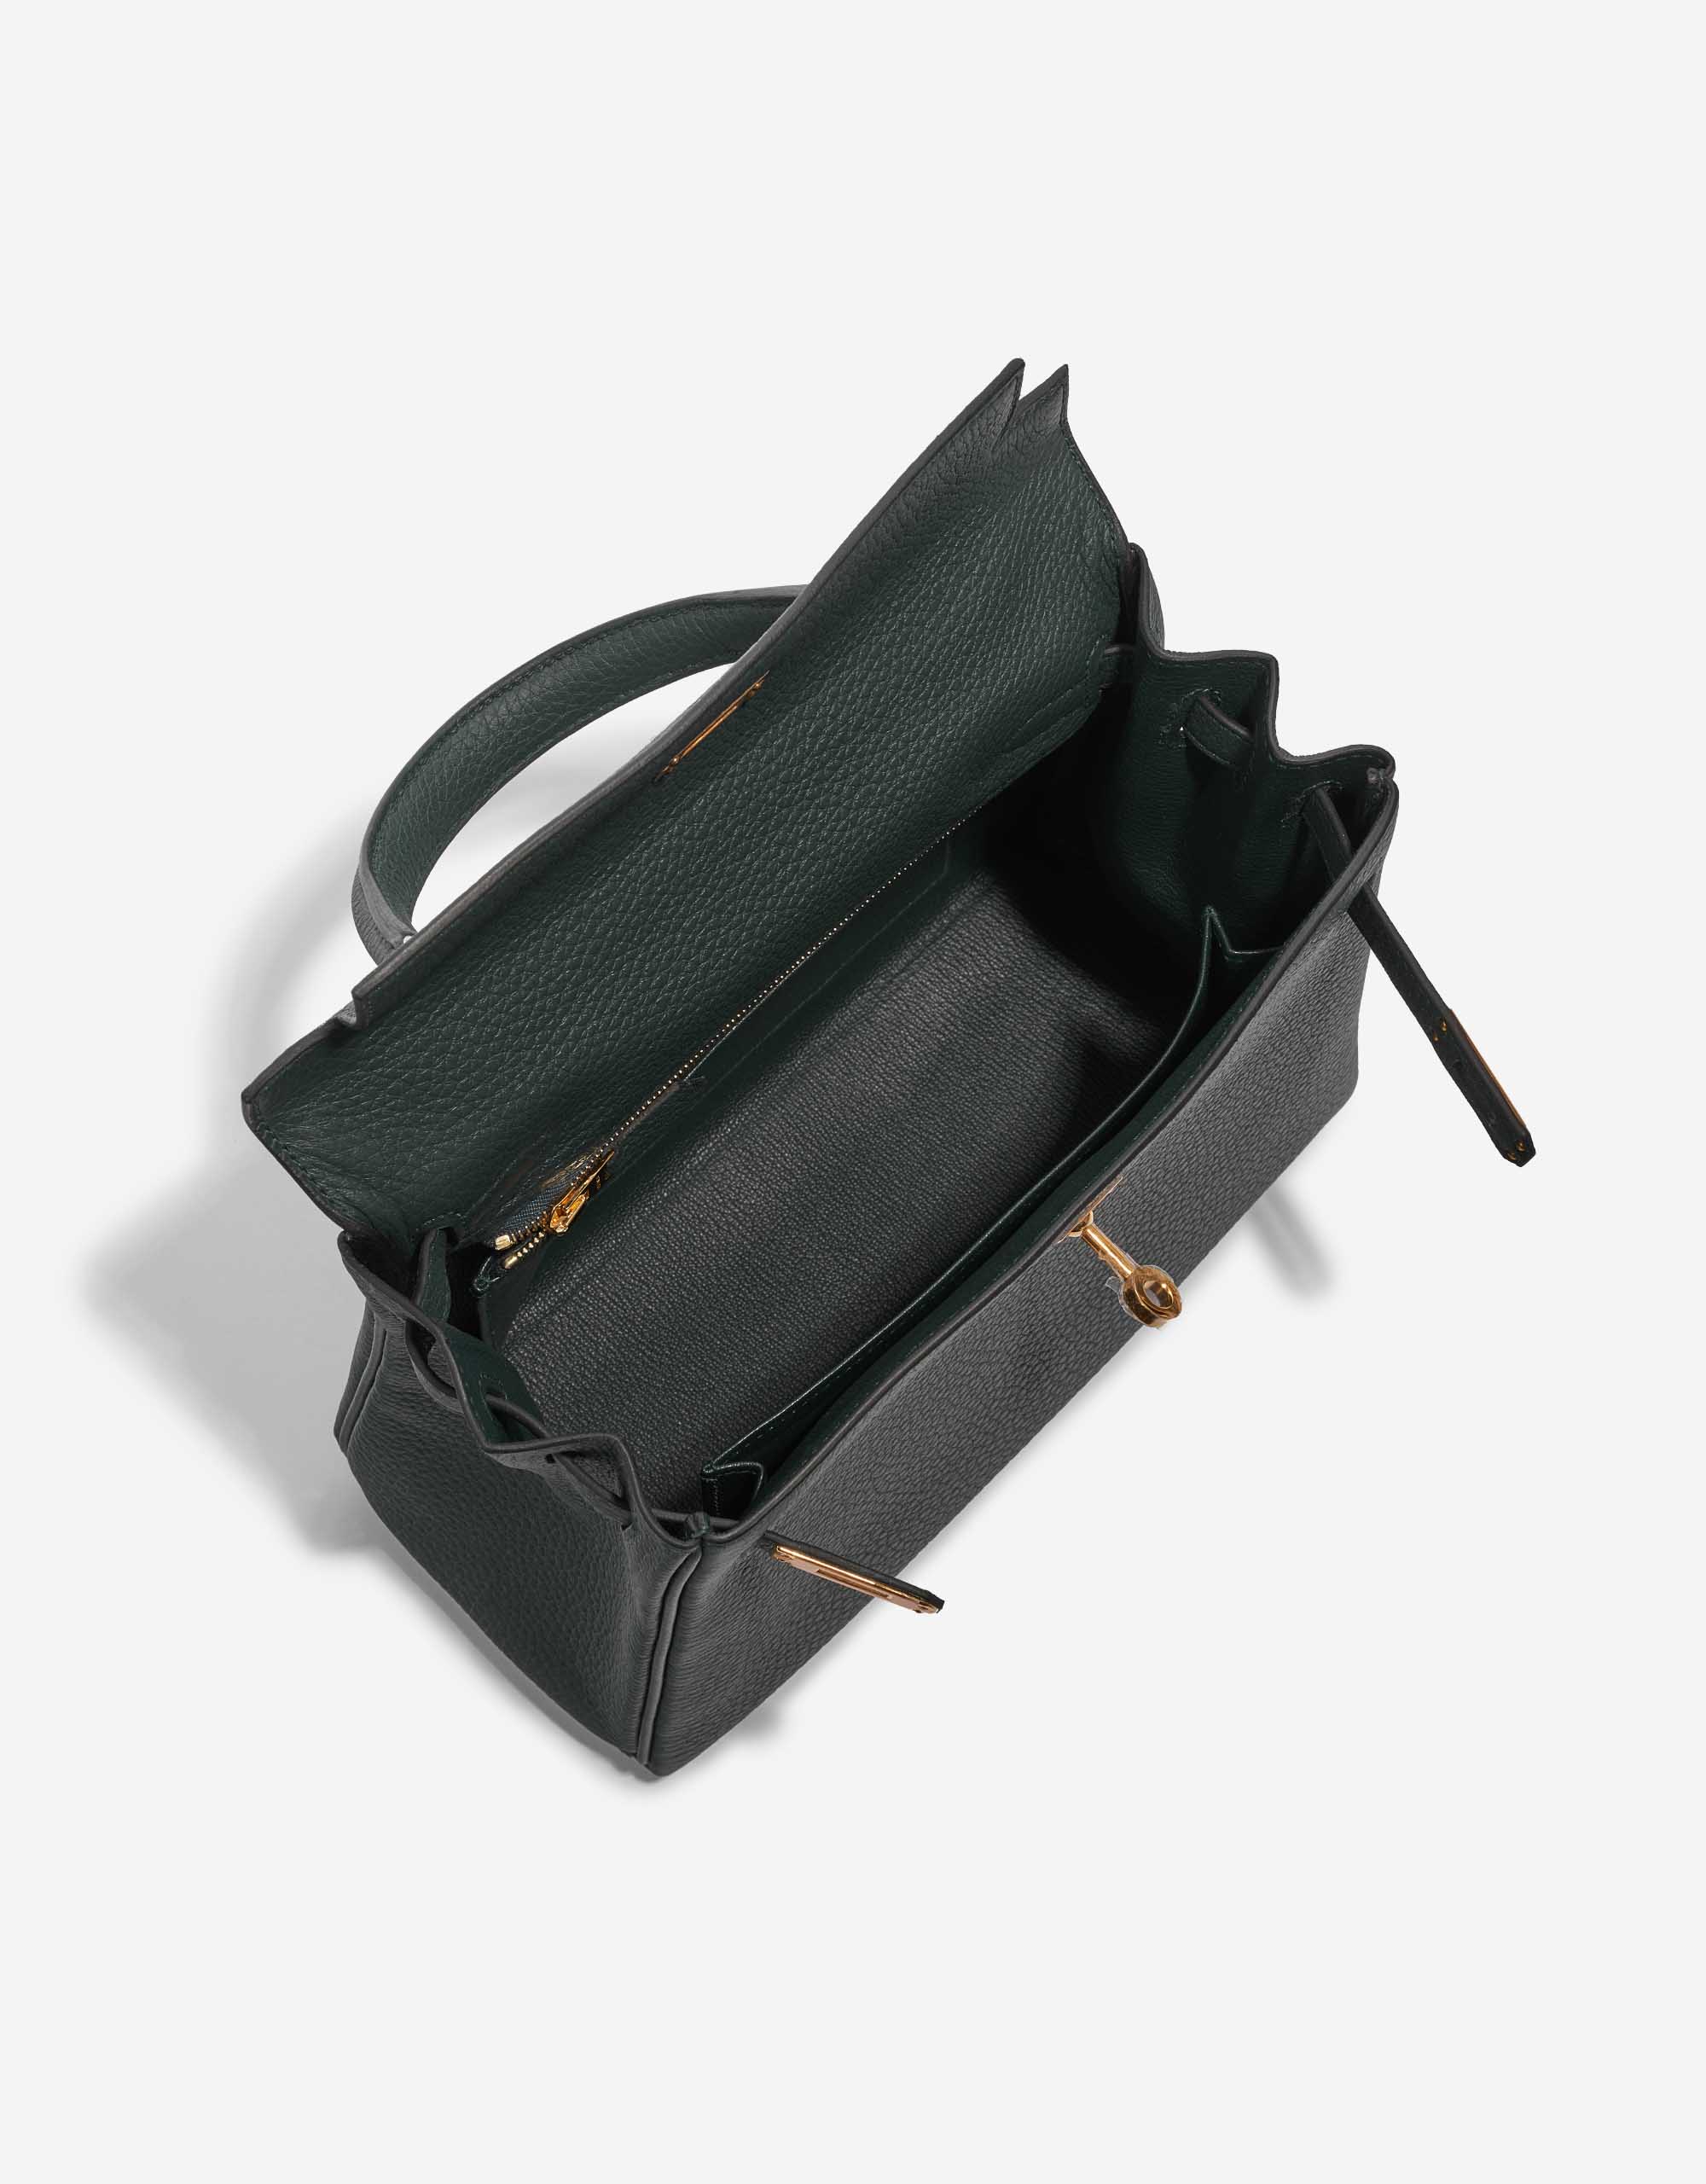 Hermes Kelly 25, Dark Green Vert Cypress Swift Leather with Gold